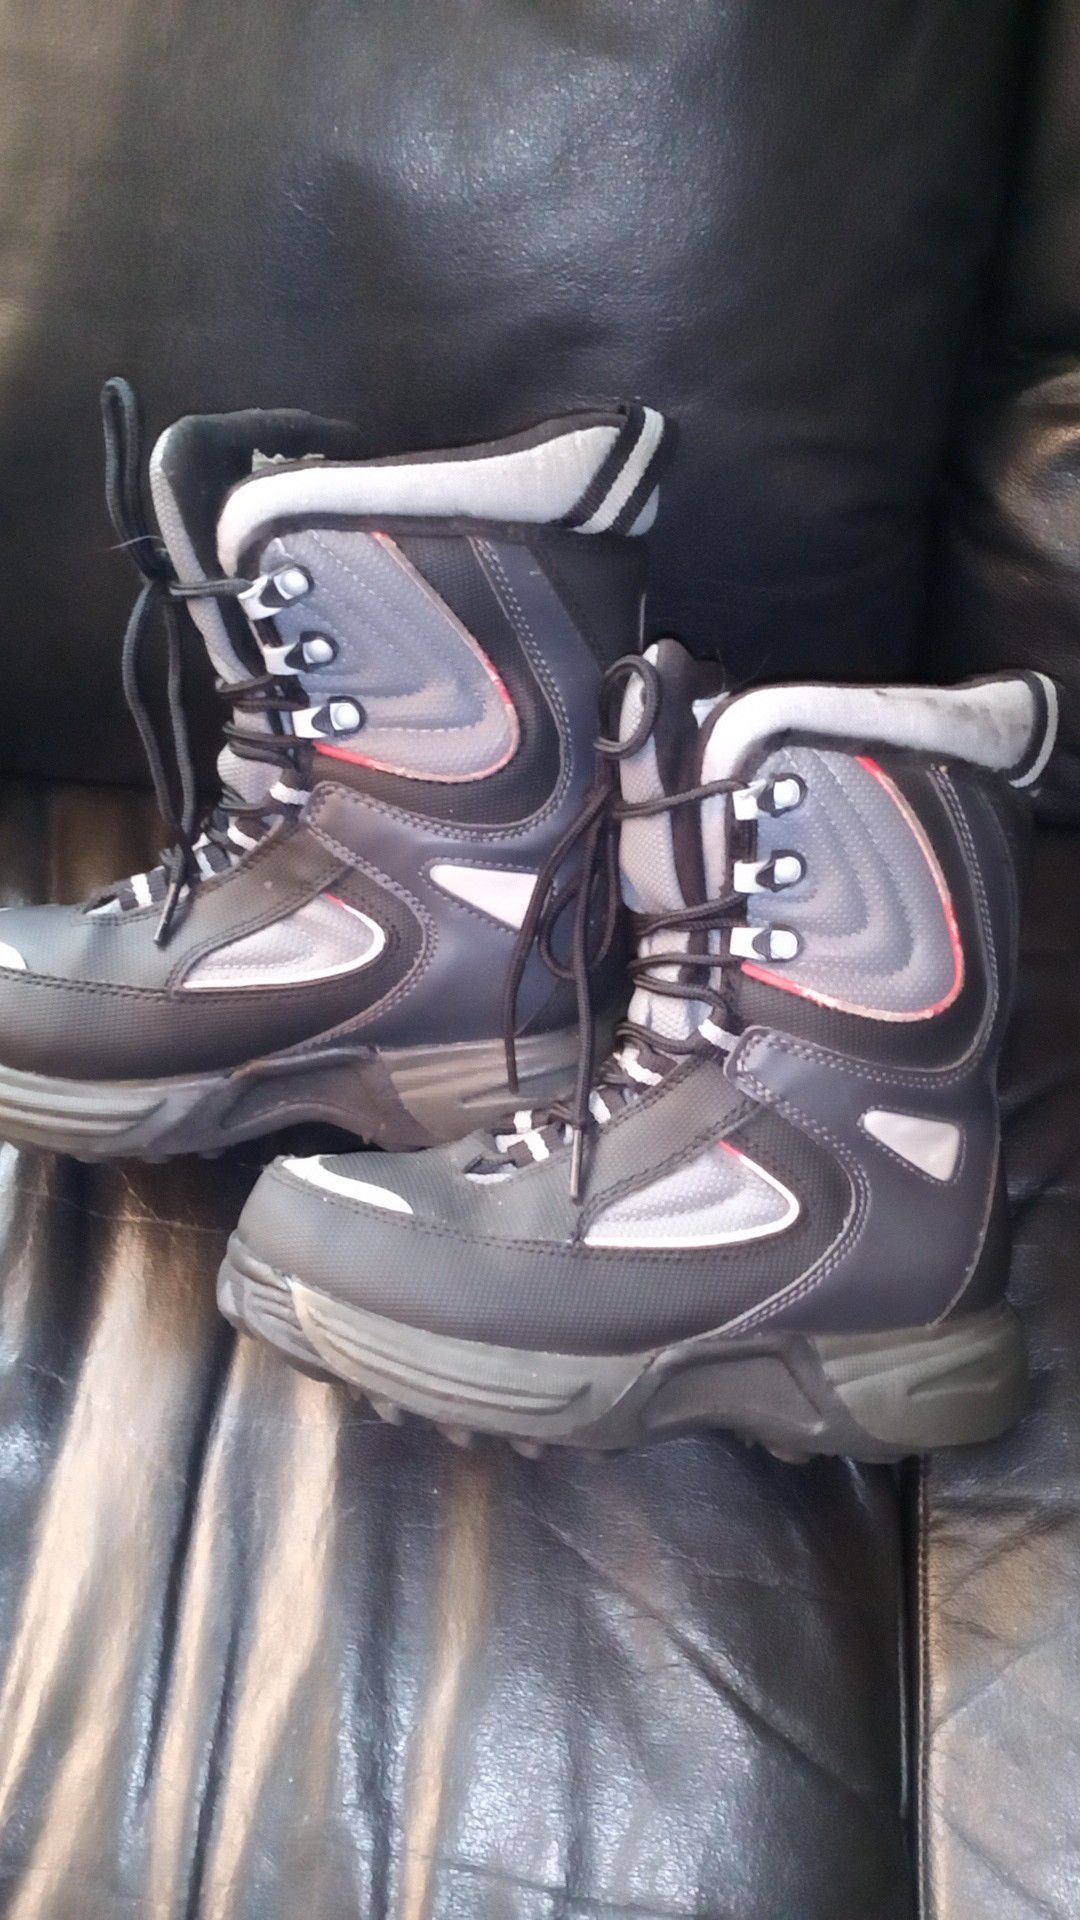 Kids boots size 3 good for rain or snow in great condition